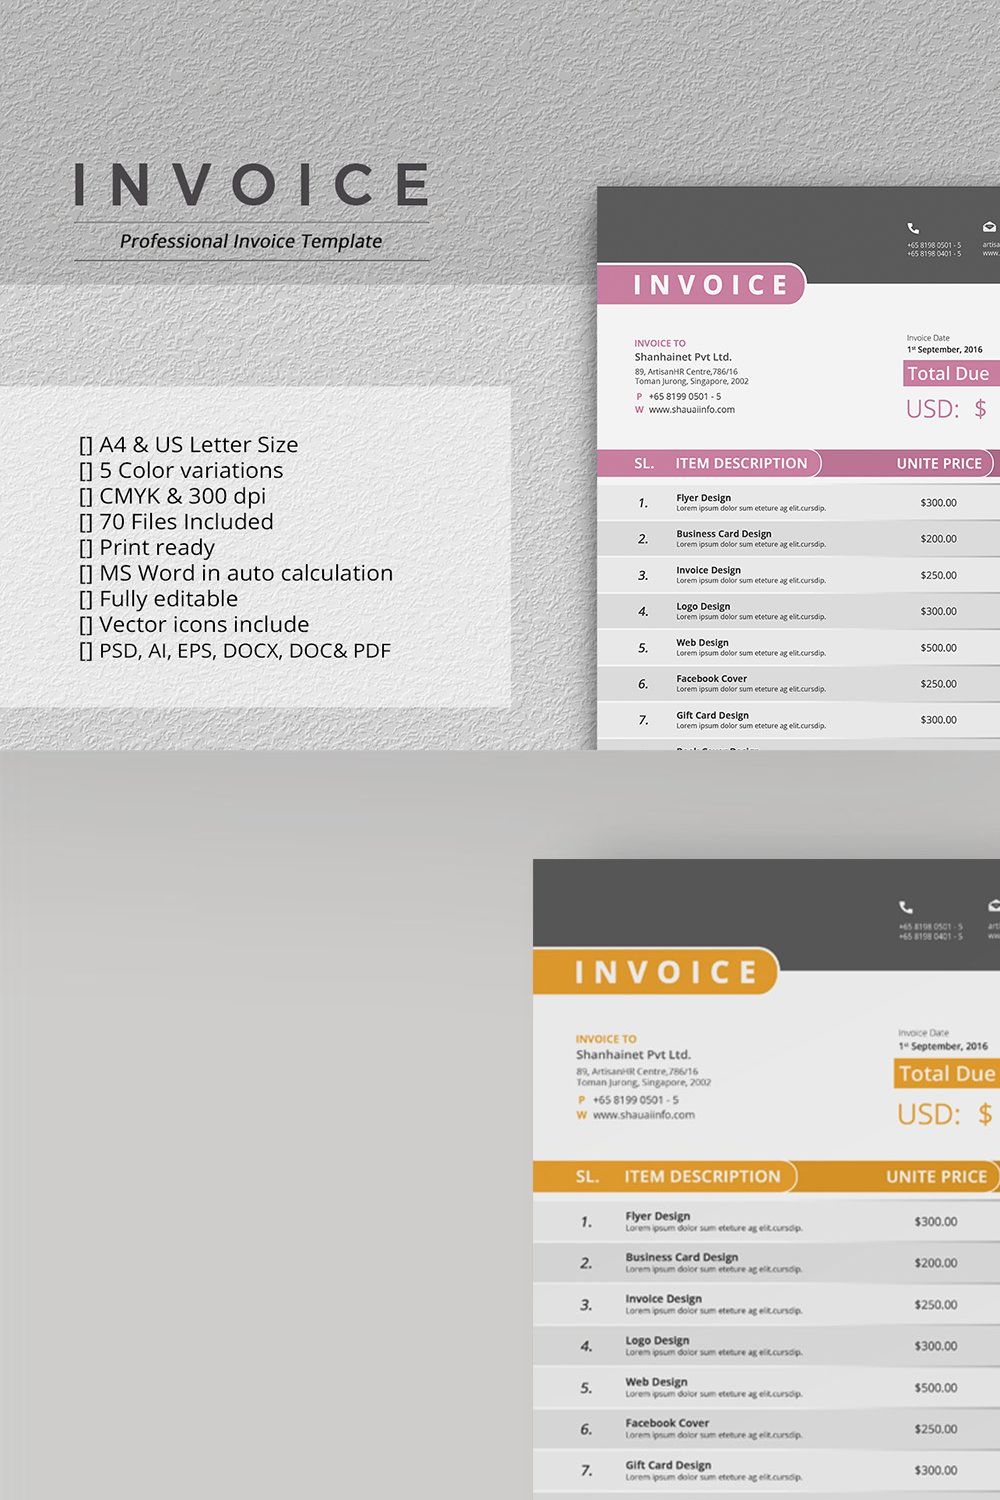 Invoice pinterest preview image.